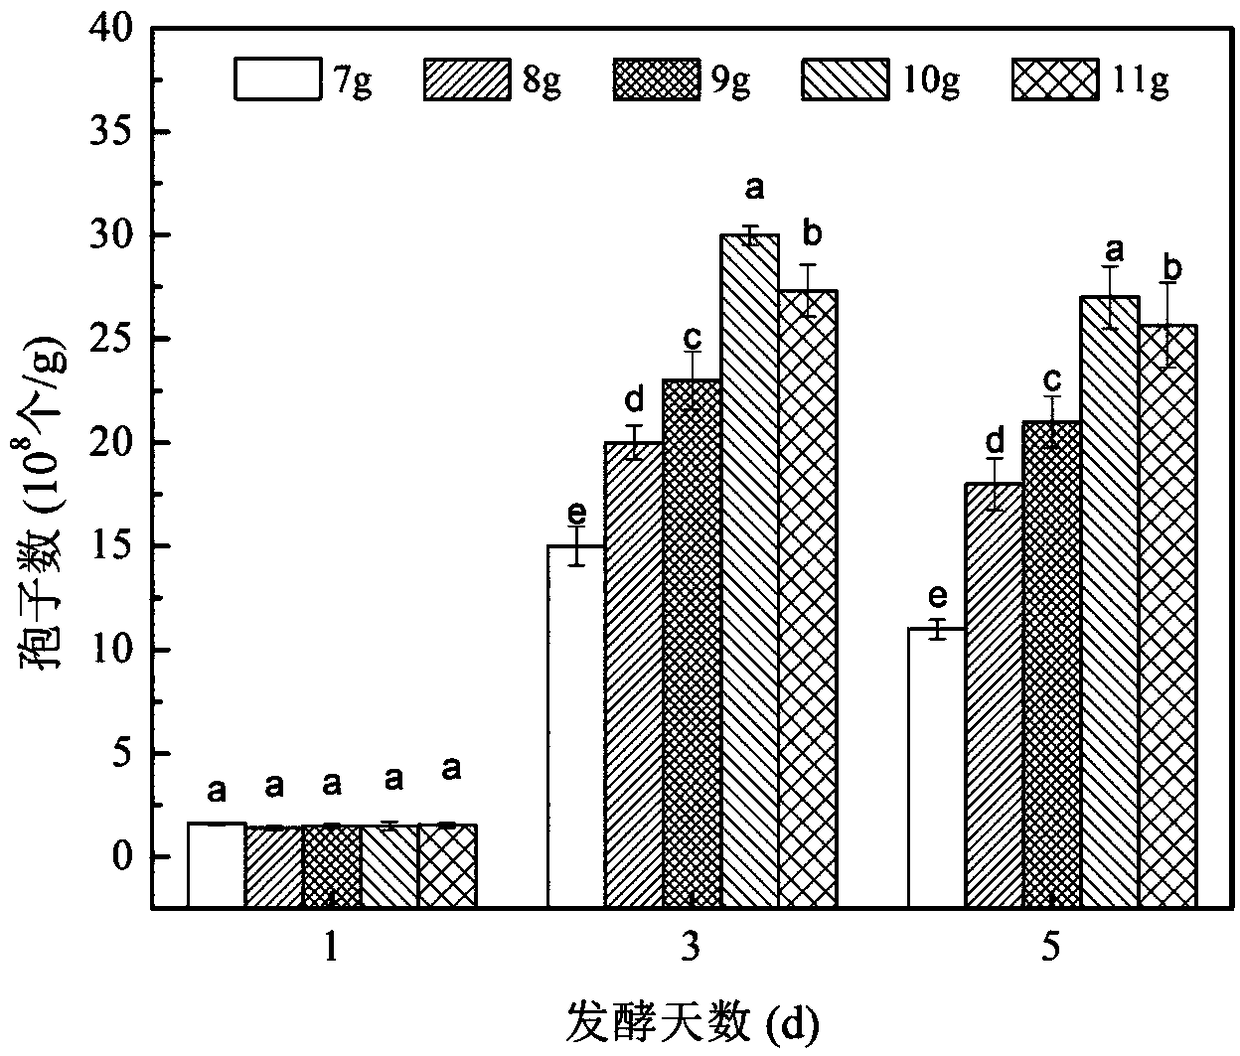 Eurotium cristatum solid state fermentation method of ginkgo seeds, and product prepared by eurotium cristatum solid state fermentation method and application of product